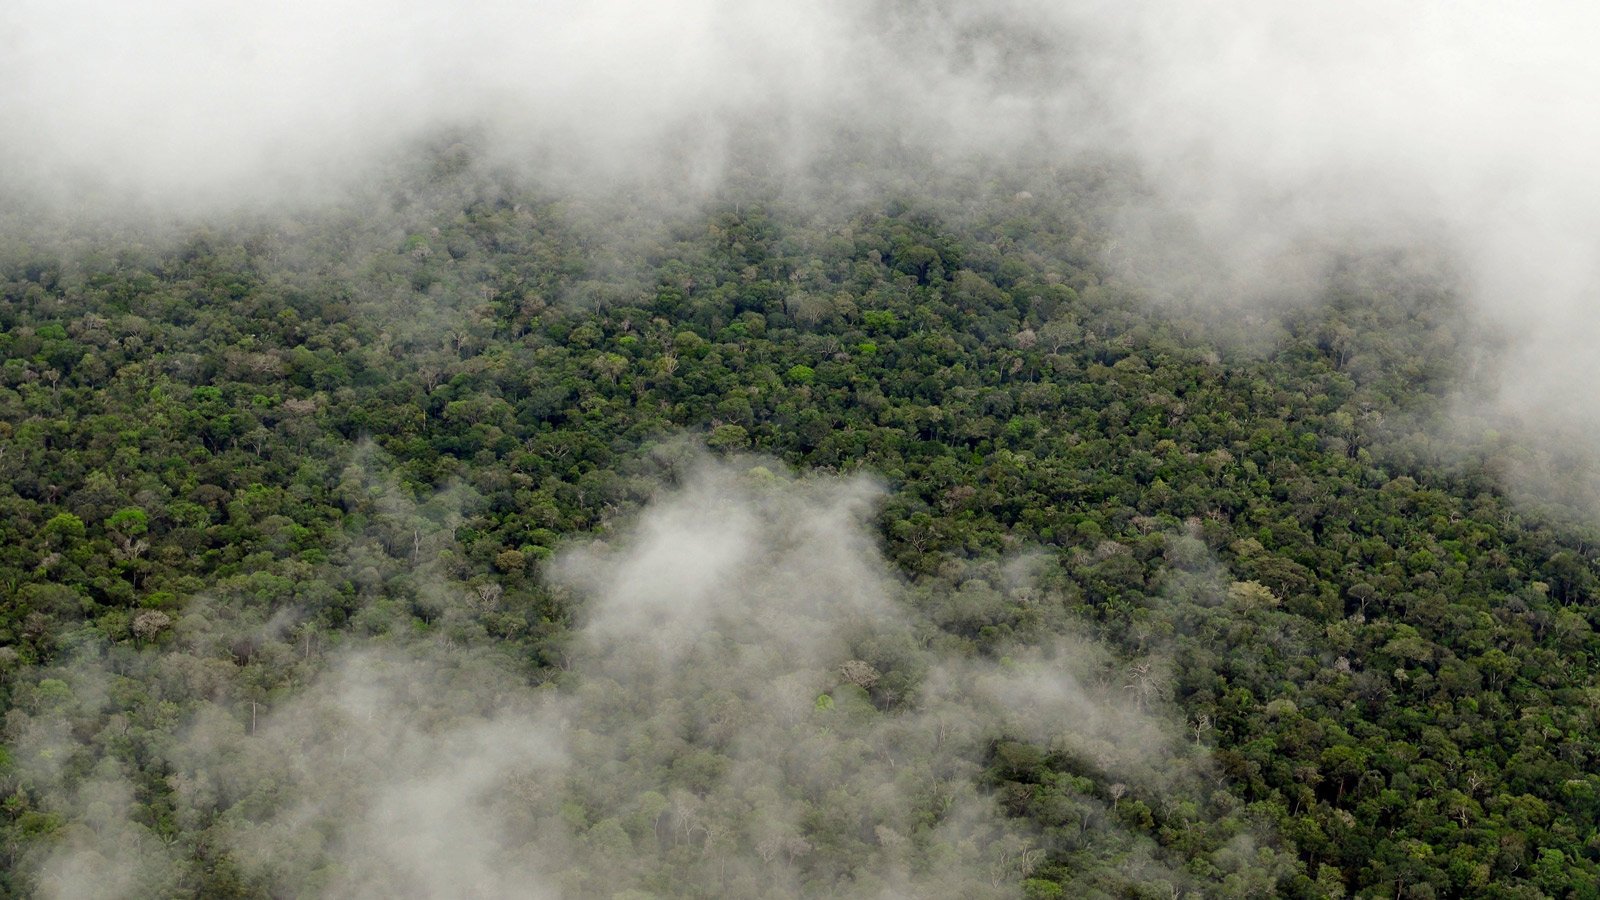 The Amazon rainforest. Credit: Center for International Forestry Research